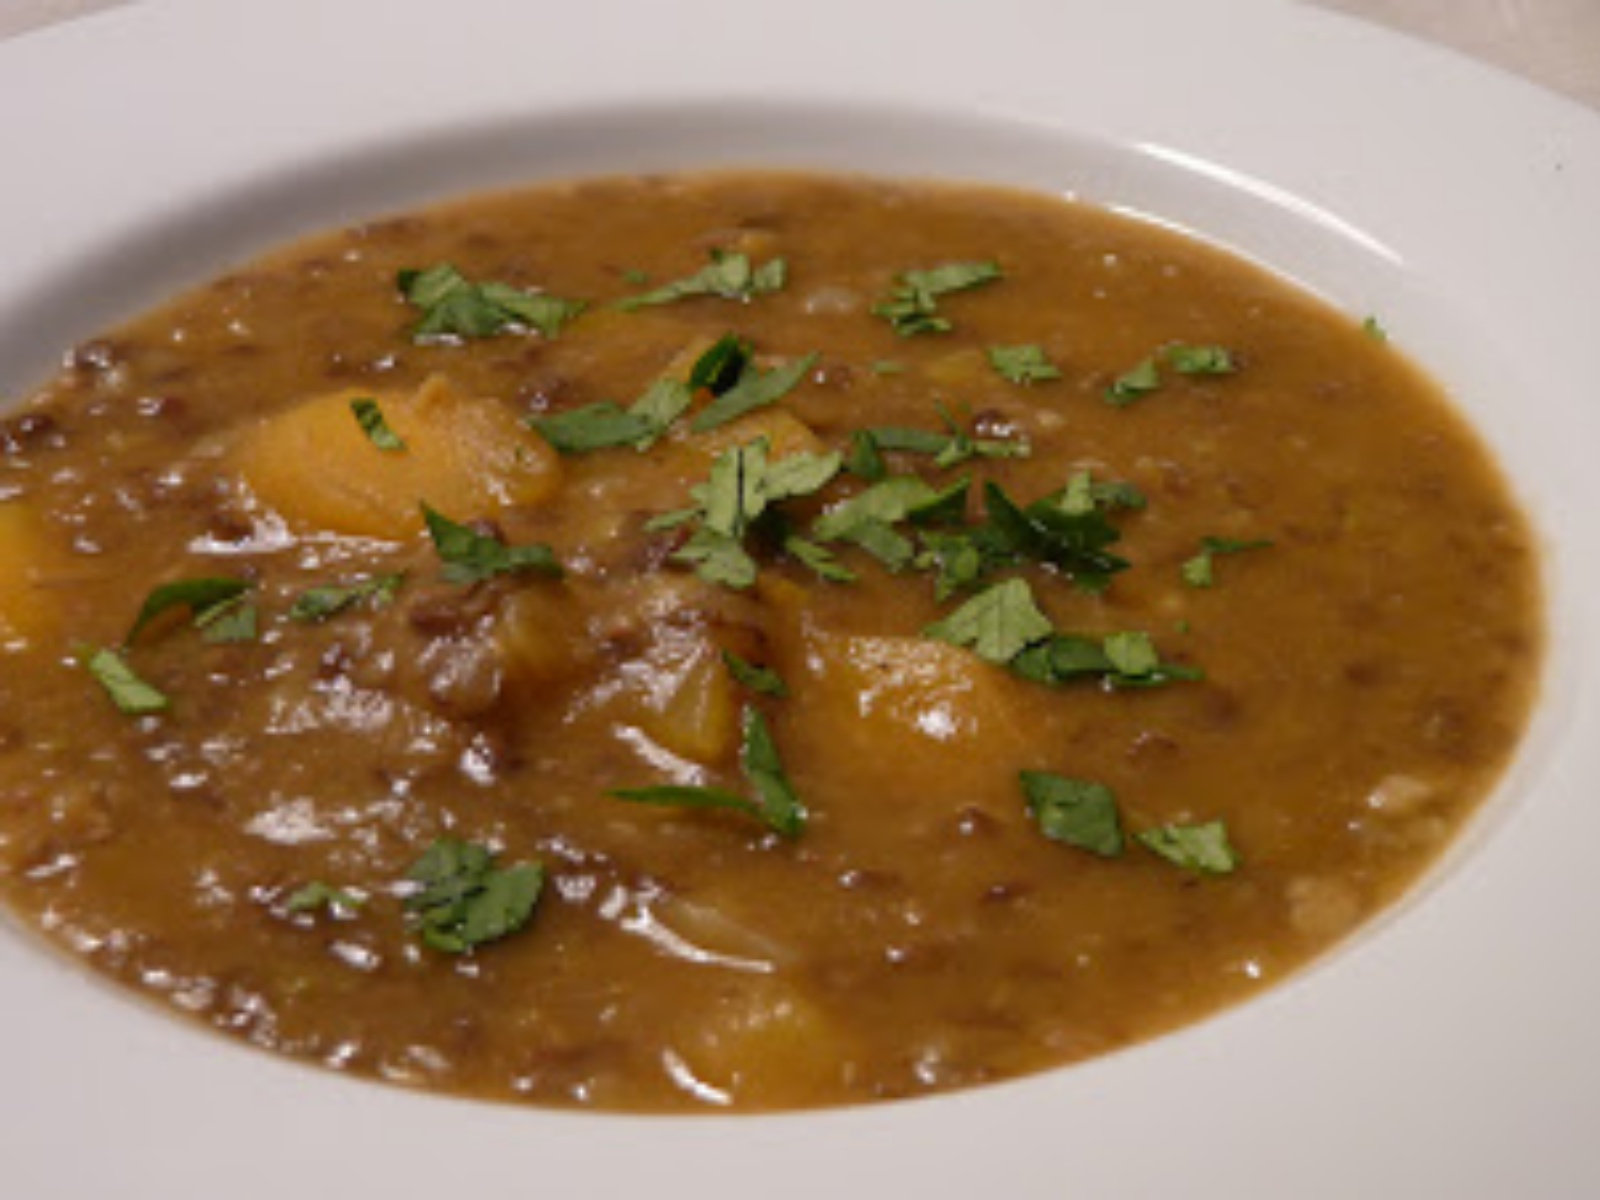 Simple Lentil Soup With Leeks and Yellow Carrots